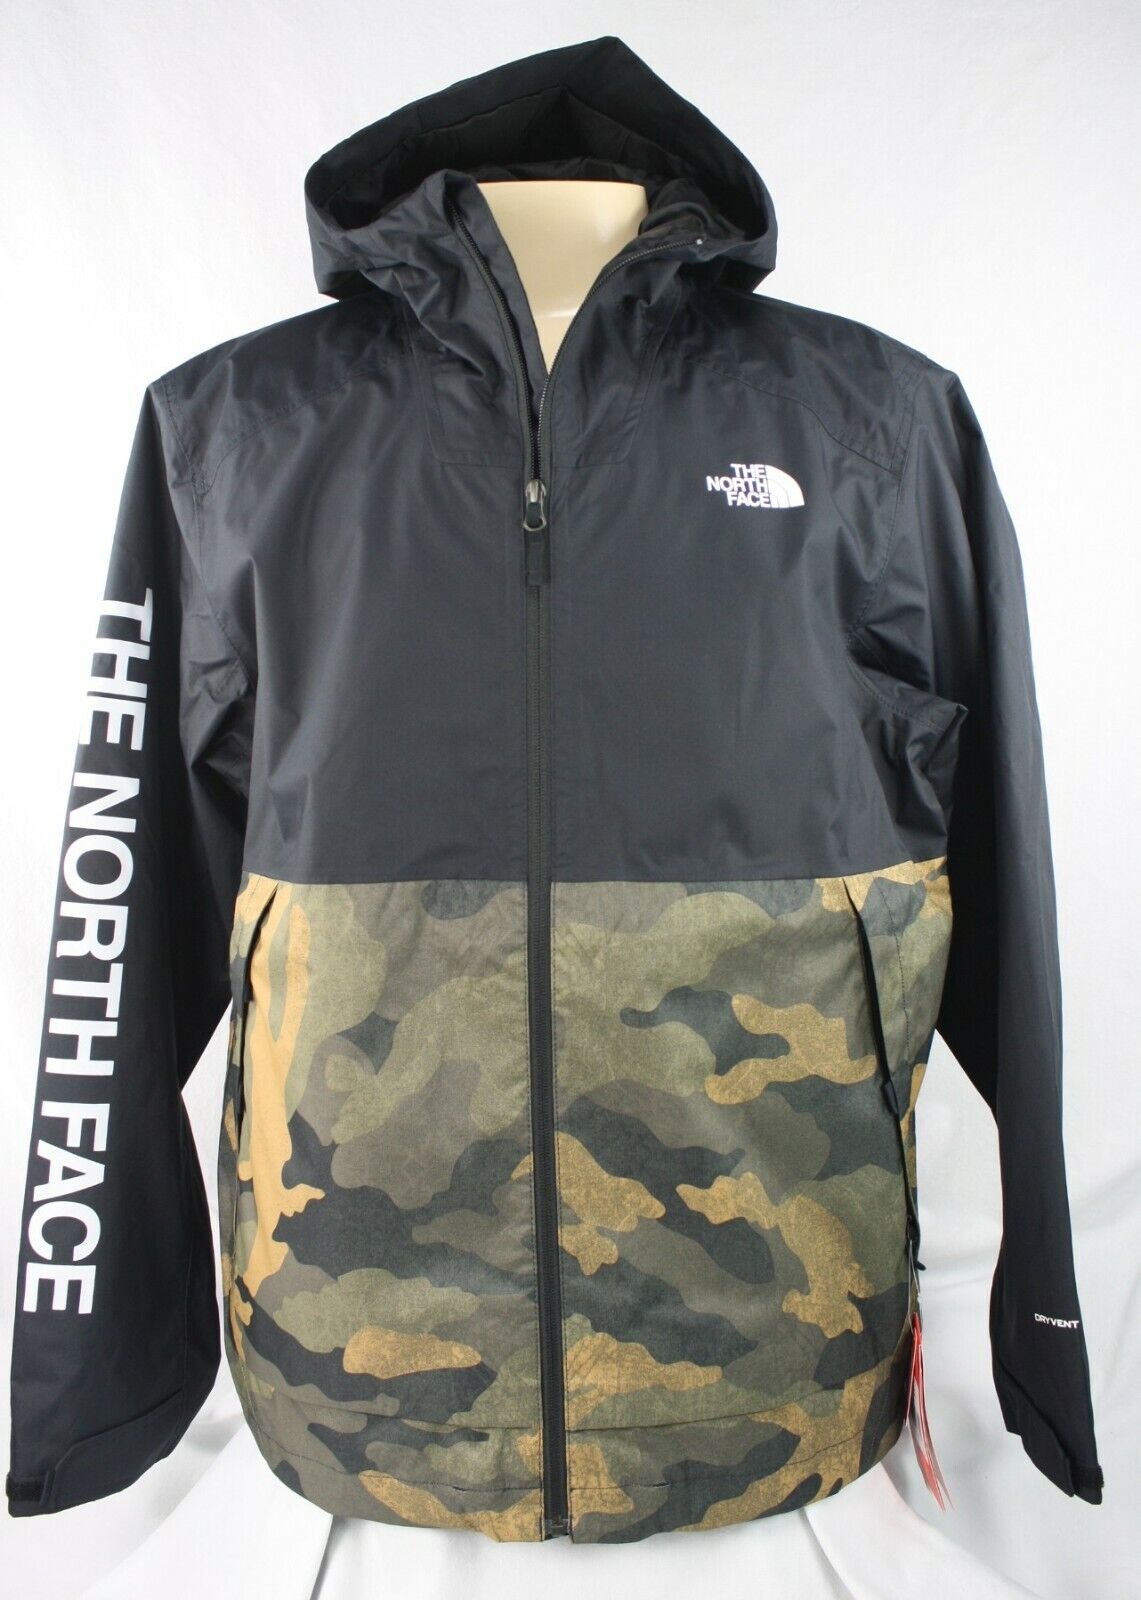 The North Face Millerton Jacket Men's Size M NF0A3SNXFE7-M Camo Black Dryvent